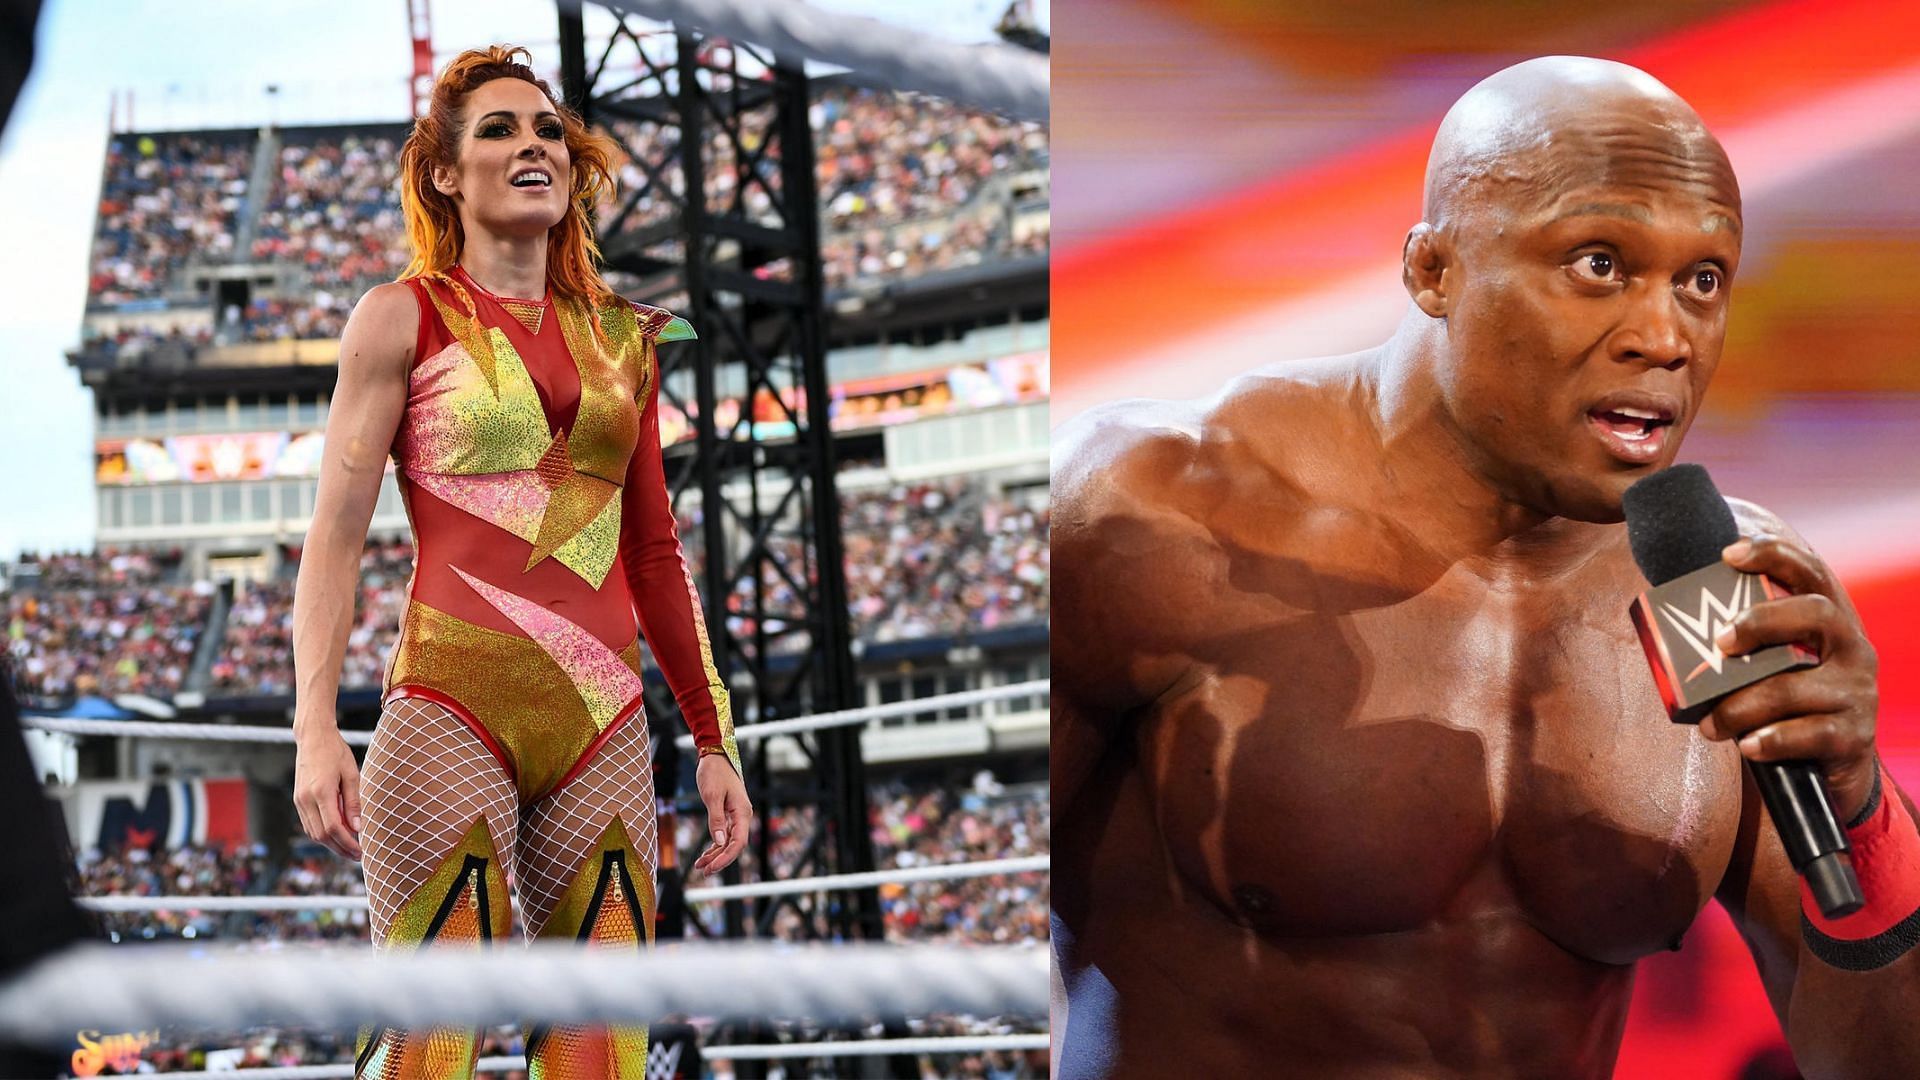 Becky Lynch and Bobby Lashley may make some noise this Saturday.